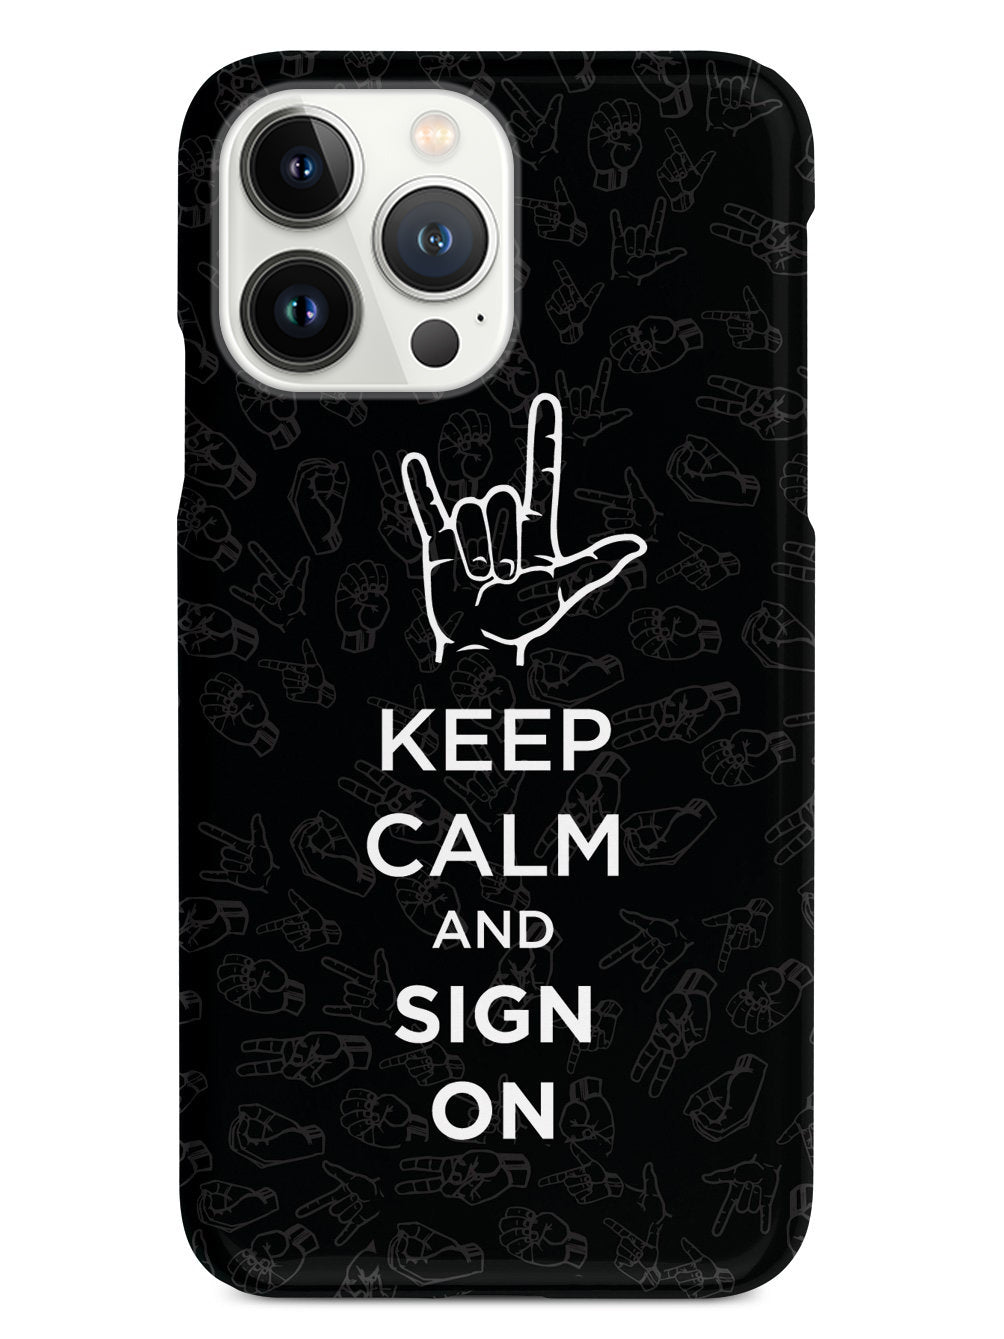 Keep Calm & Sign On - Sign Language Case